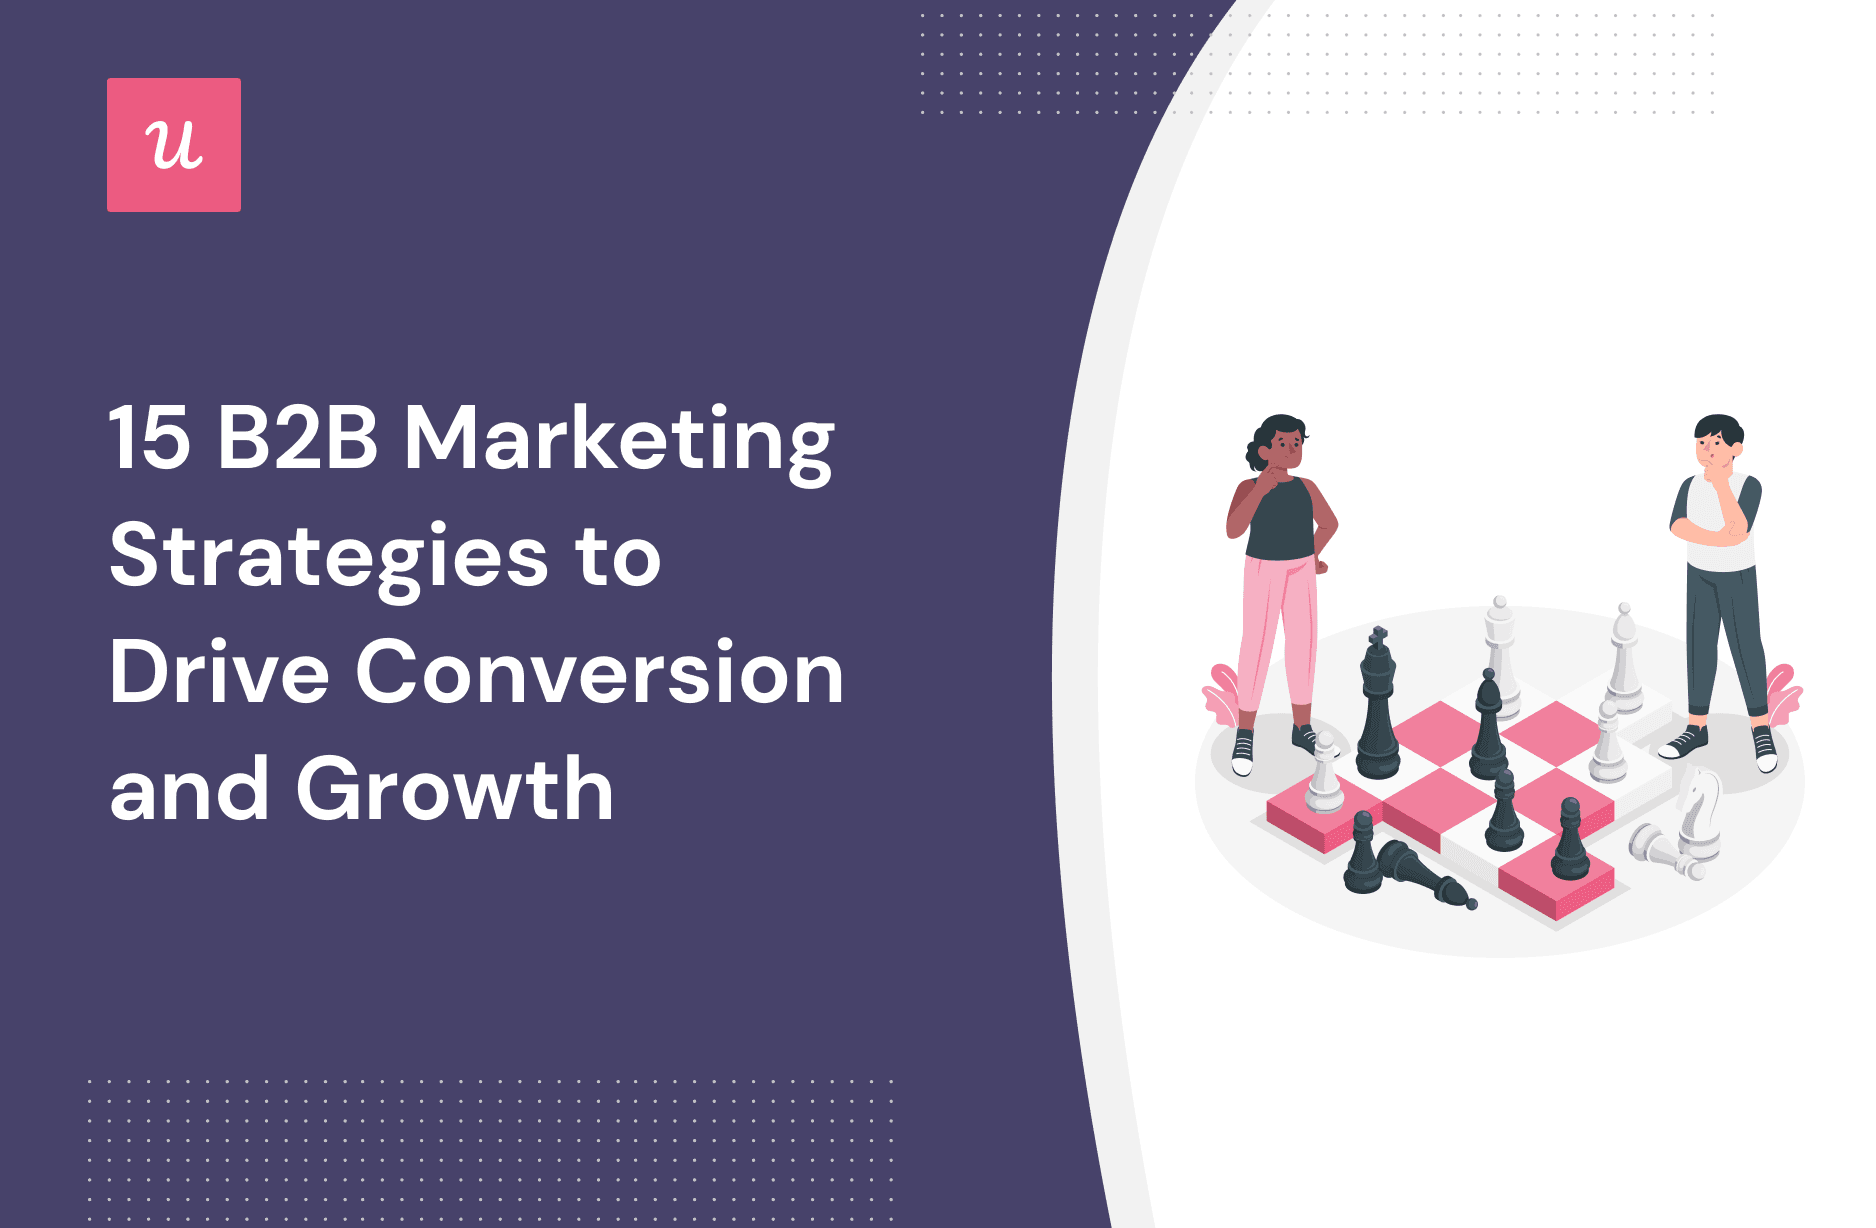 15 B2B Marketing Strategies to Drive Conversion and Growth cover